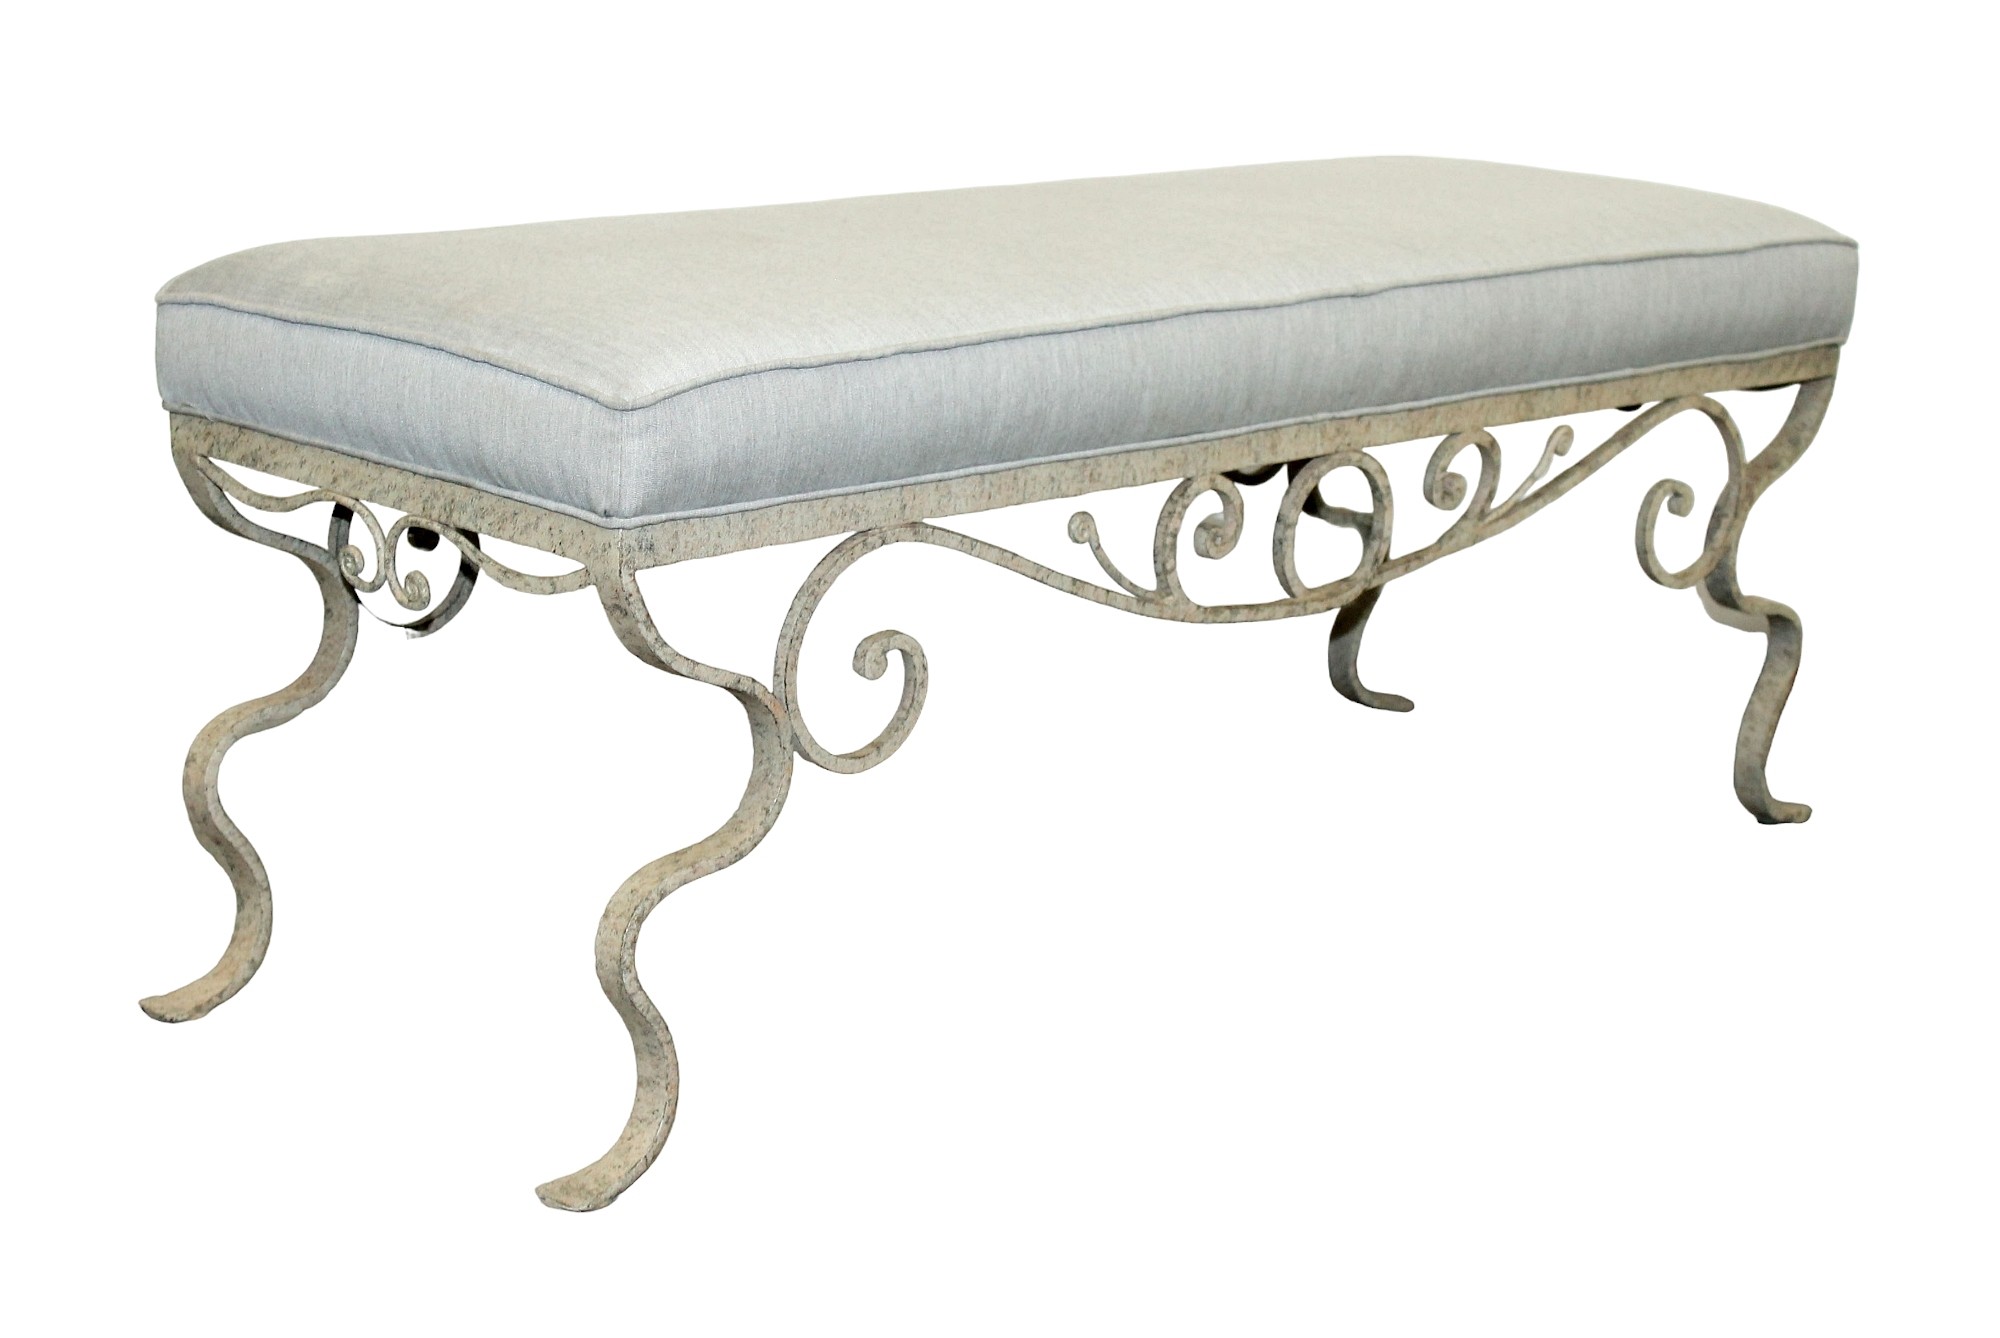 Scrolled Iron bench with linen upholstery